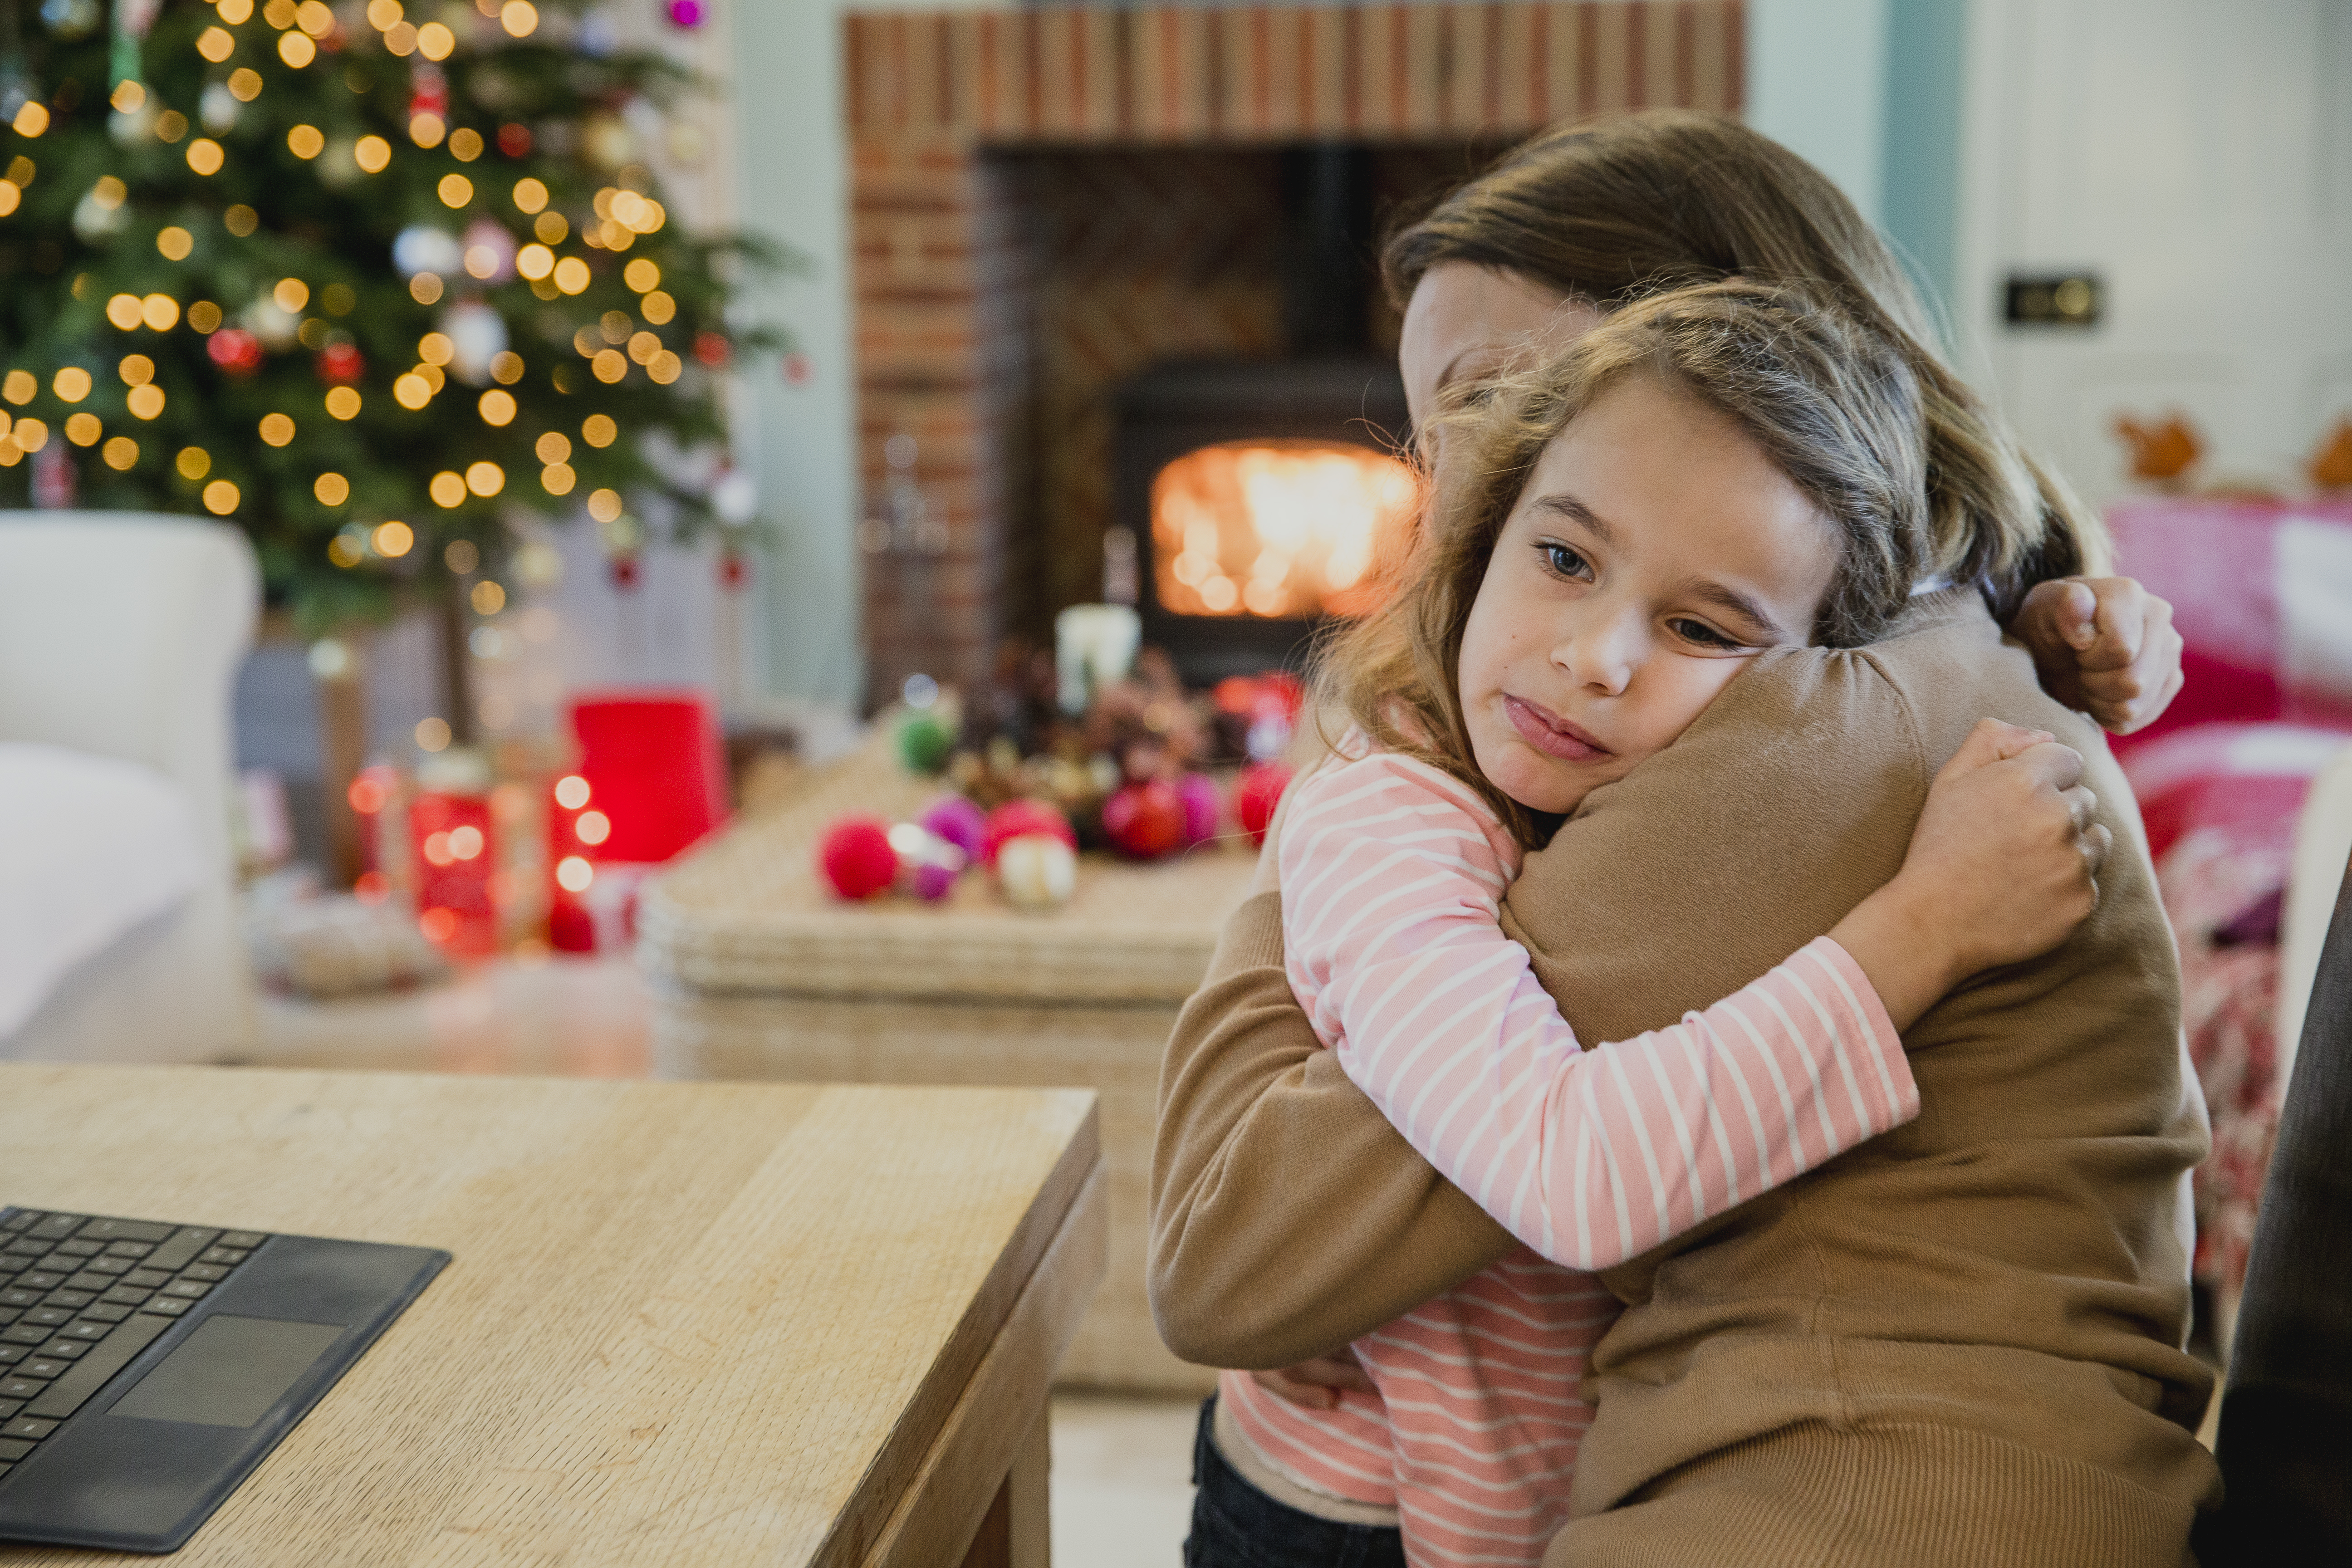 A sad young girl hugging her mom at Christmas | Source: Getty Images